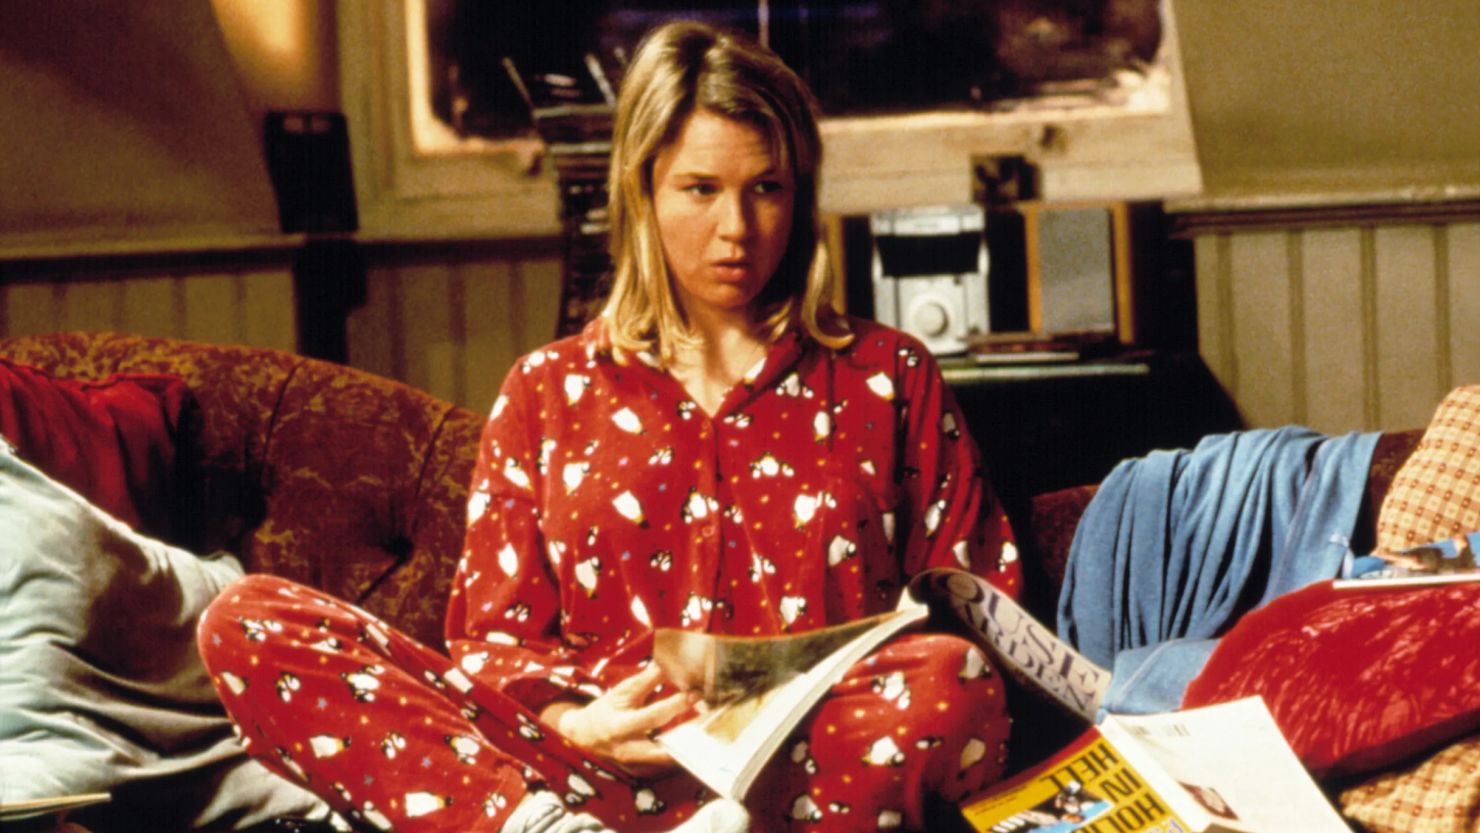 Bridget Jones' fourth film "Mad About the Boy" will debut next year, and will bring back Renée Zellweger and Hugh Grant.